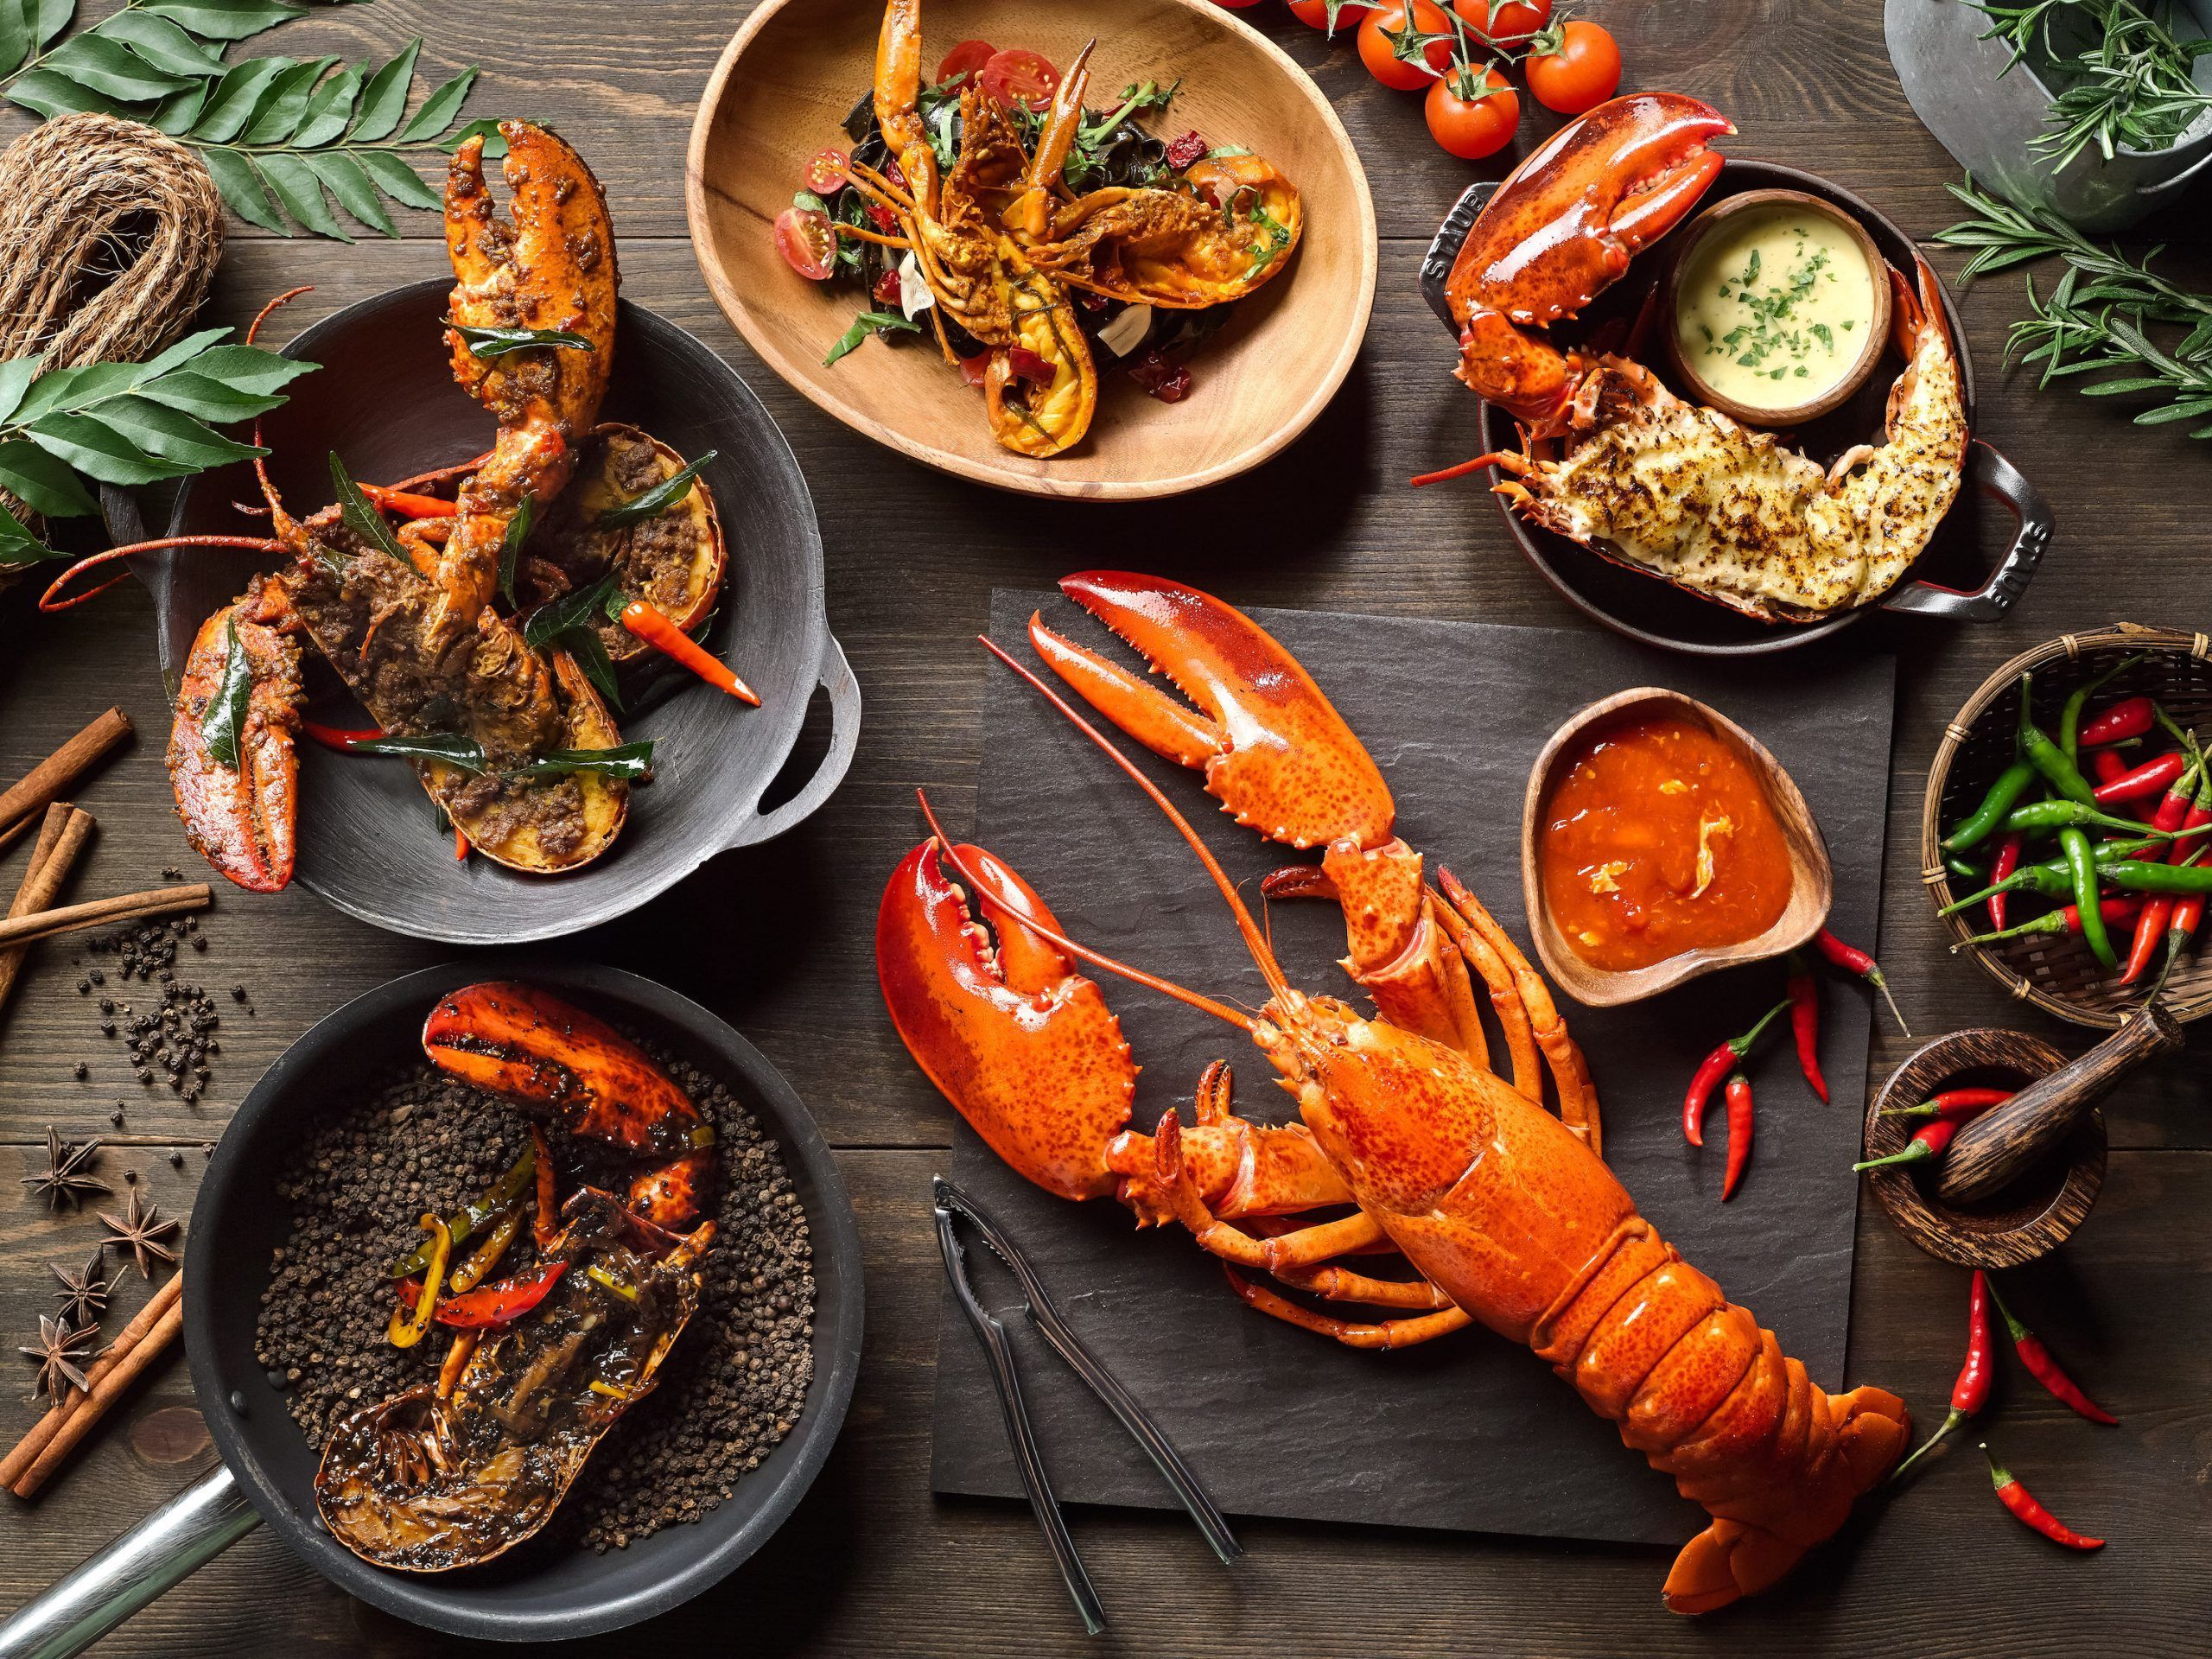 Lobsterfest returns to Singapore with buffets from now till 31 August